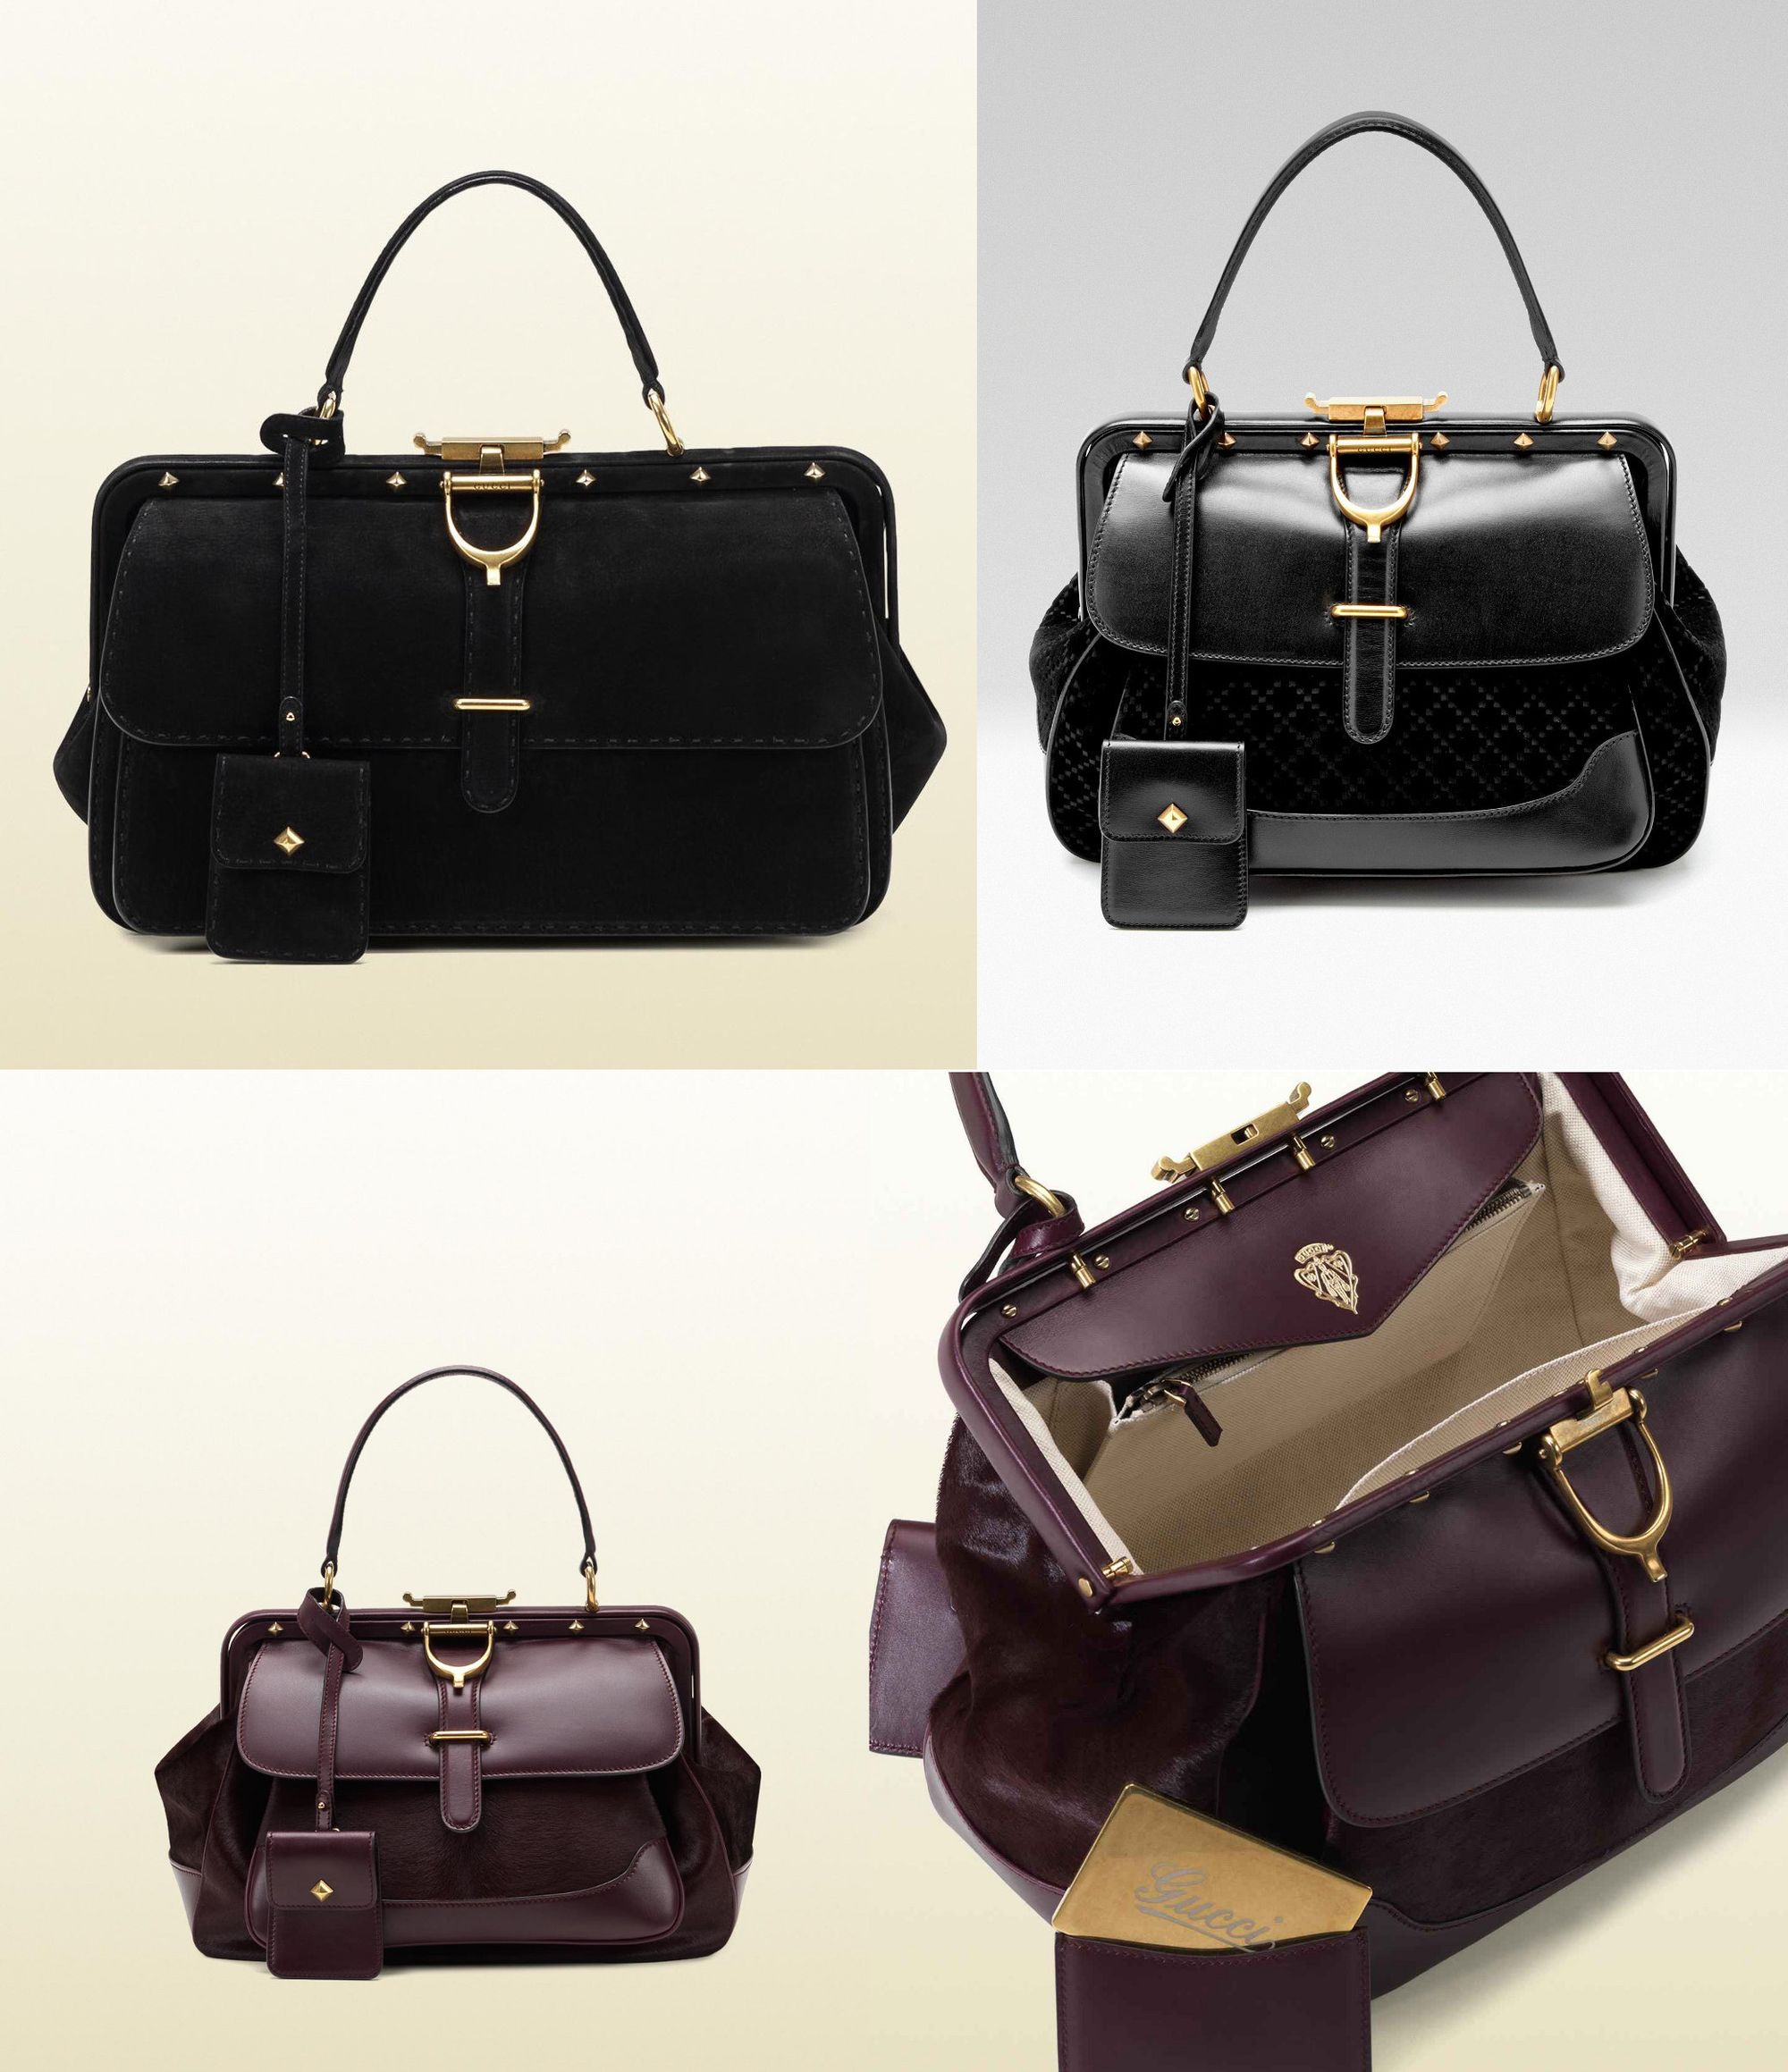 Gucci Lady Stirrup bags in suede, velvet and pony skin (Photo courtesy | Gucci)